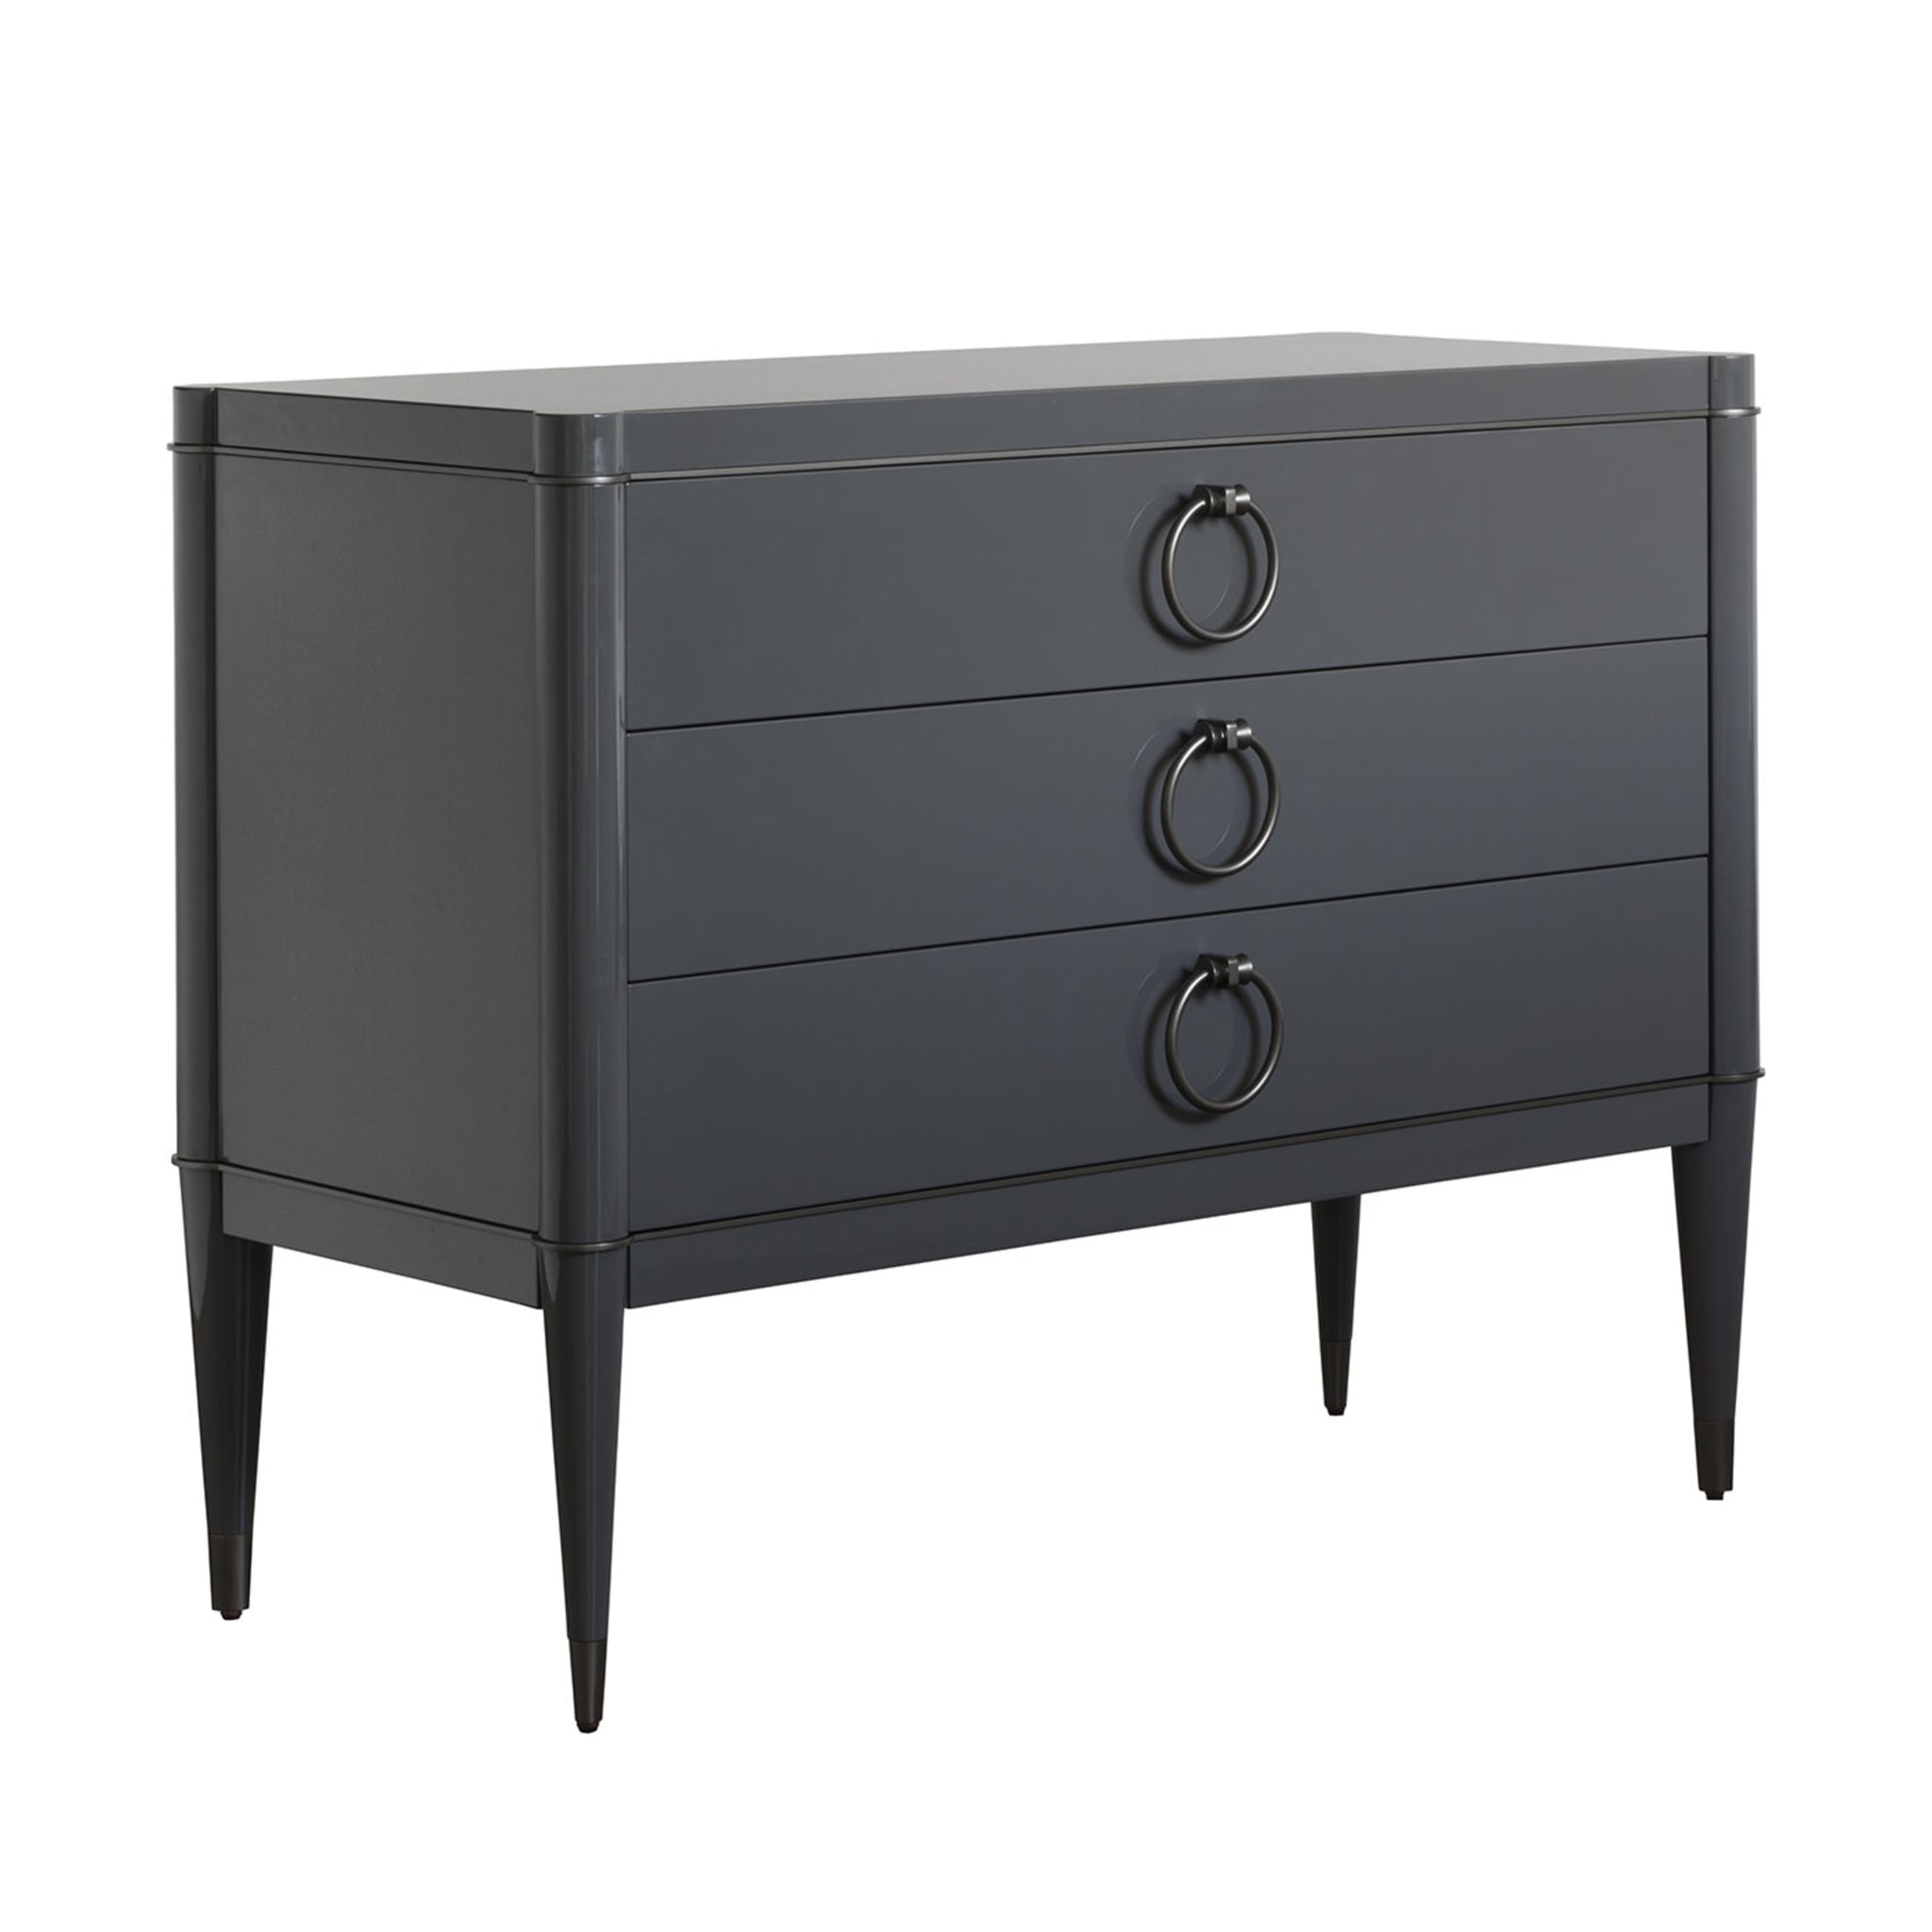 Ambra Chest of Drawers - Alternative view 1